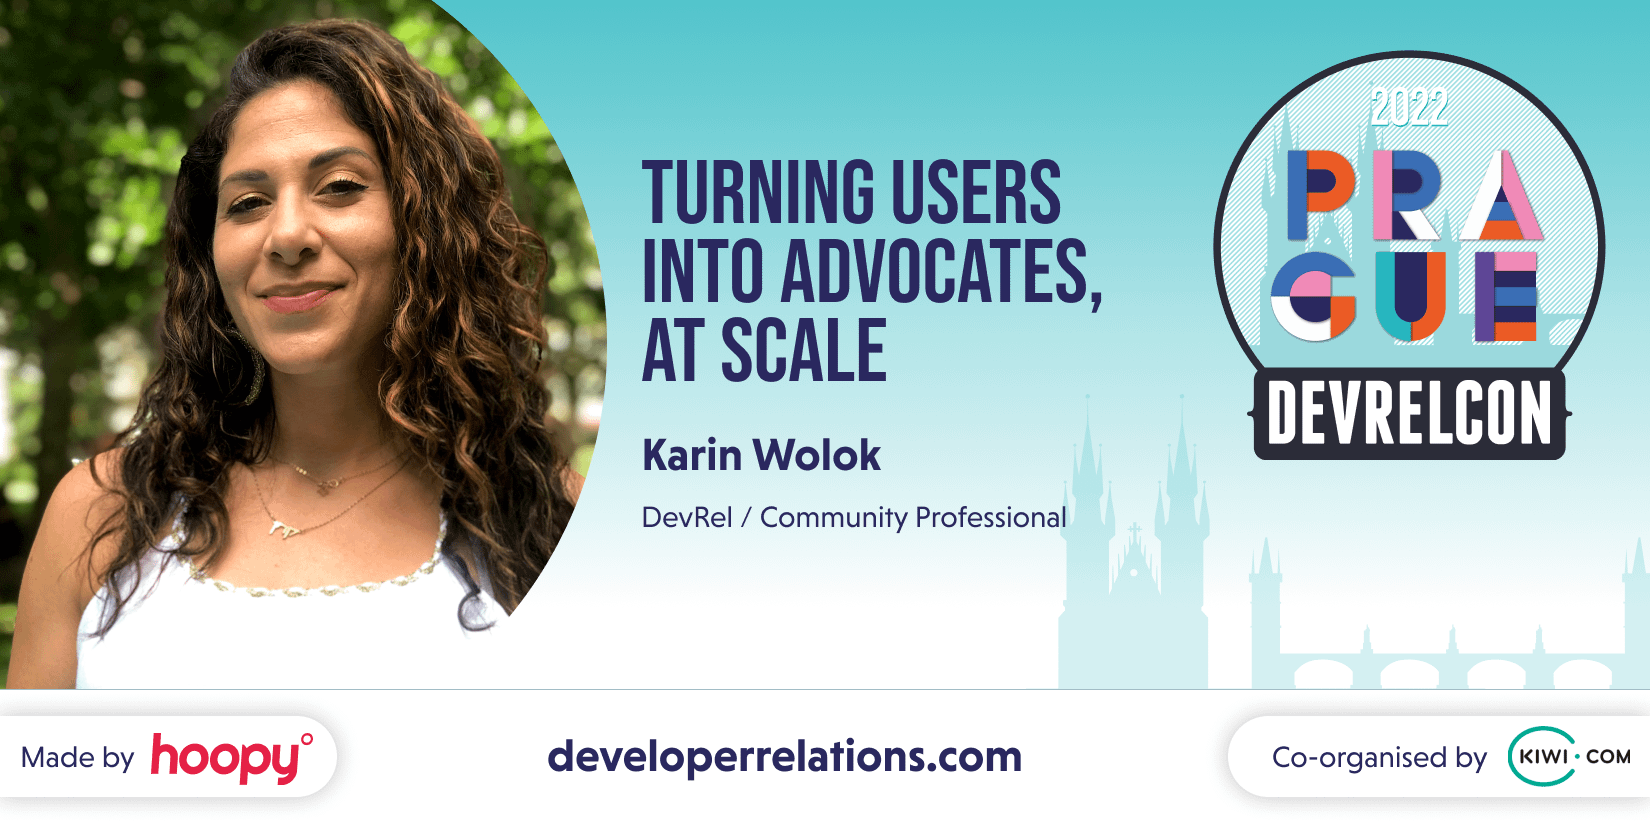 Turning users into advocates at scale, Karin Wolok